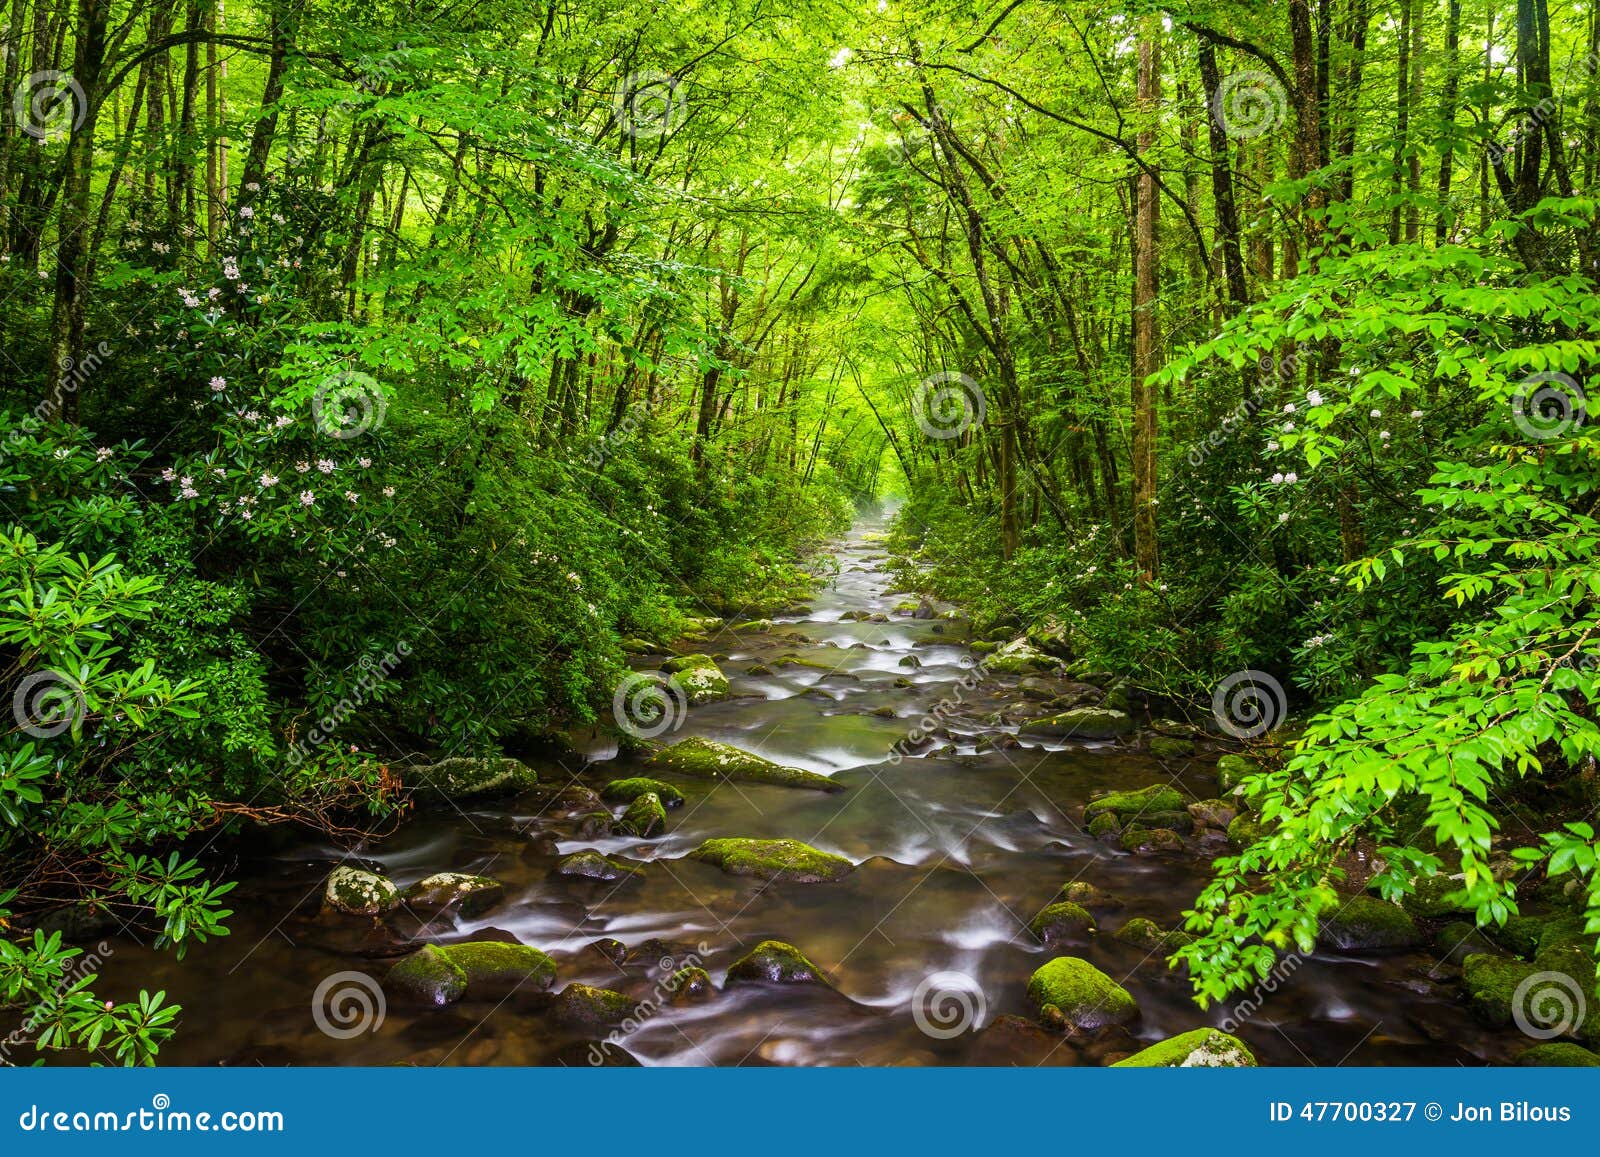 the oconaluftee river, at great smoky mountains national park, n